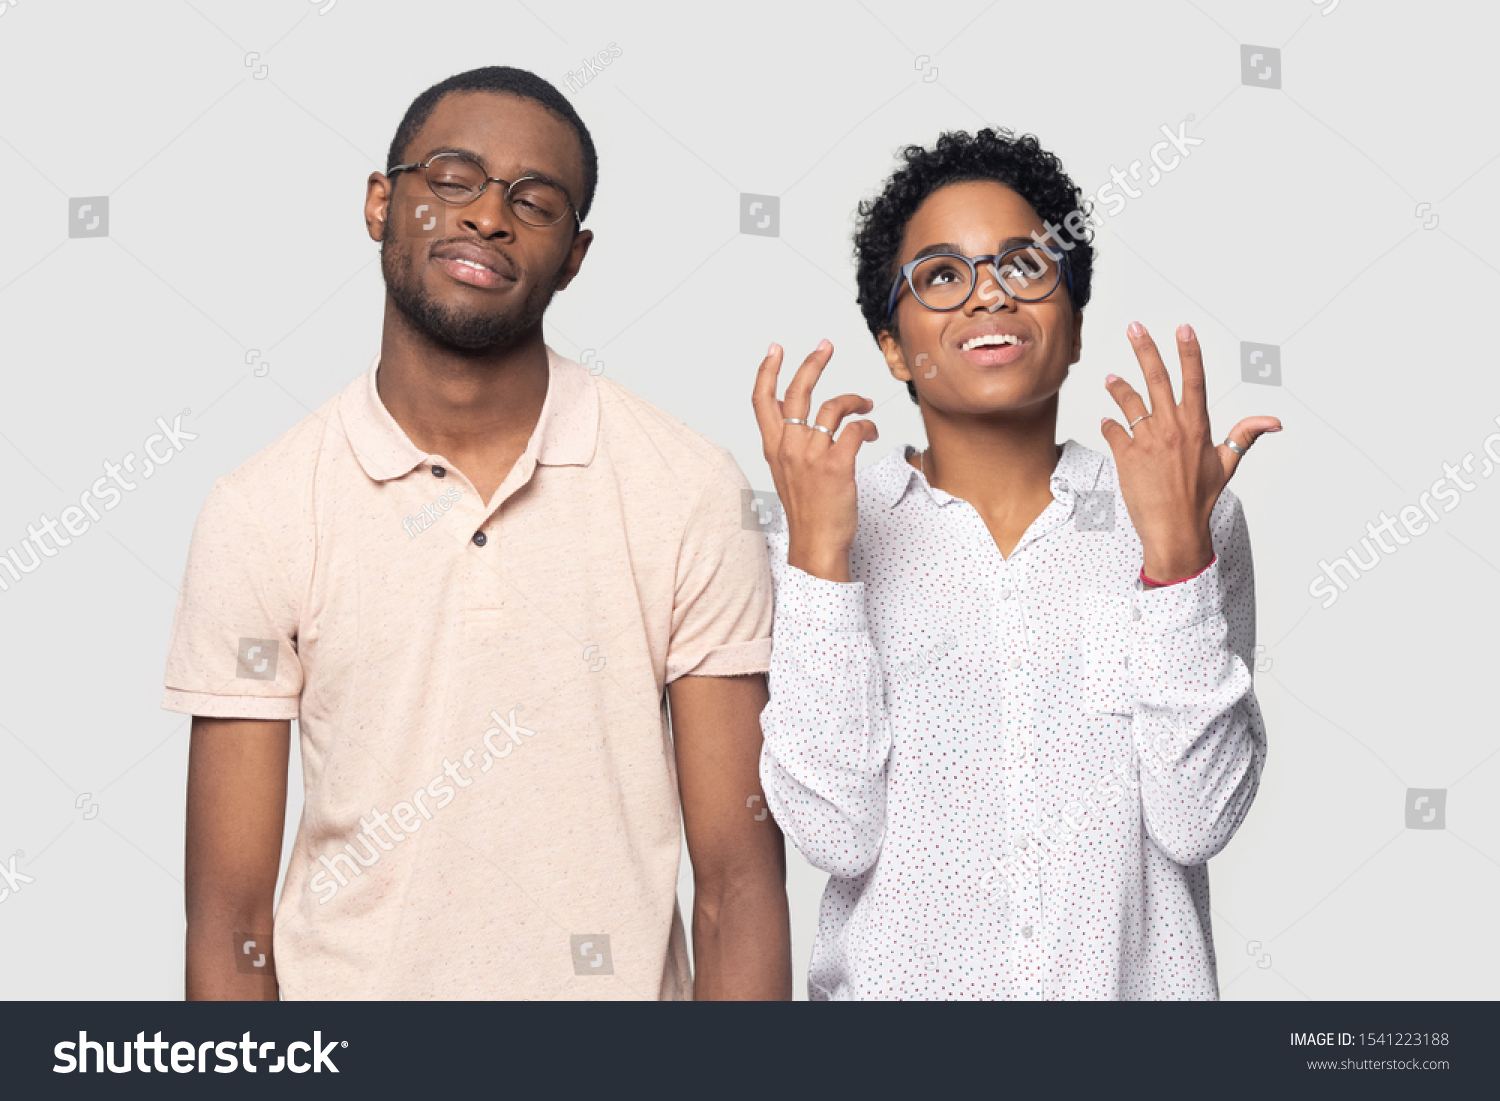 Head shot bored African American man listening to excited smiling woman, bad conversation, beautiful girlfriend talking to boyfriend, friends wearing glasses standing isolated on grey background #1541223188